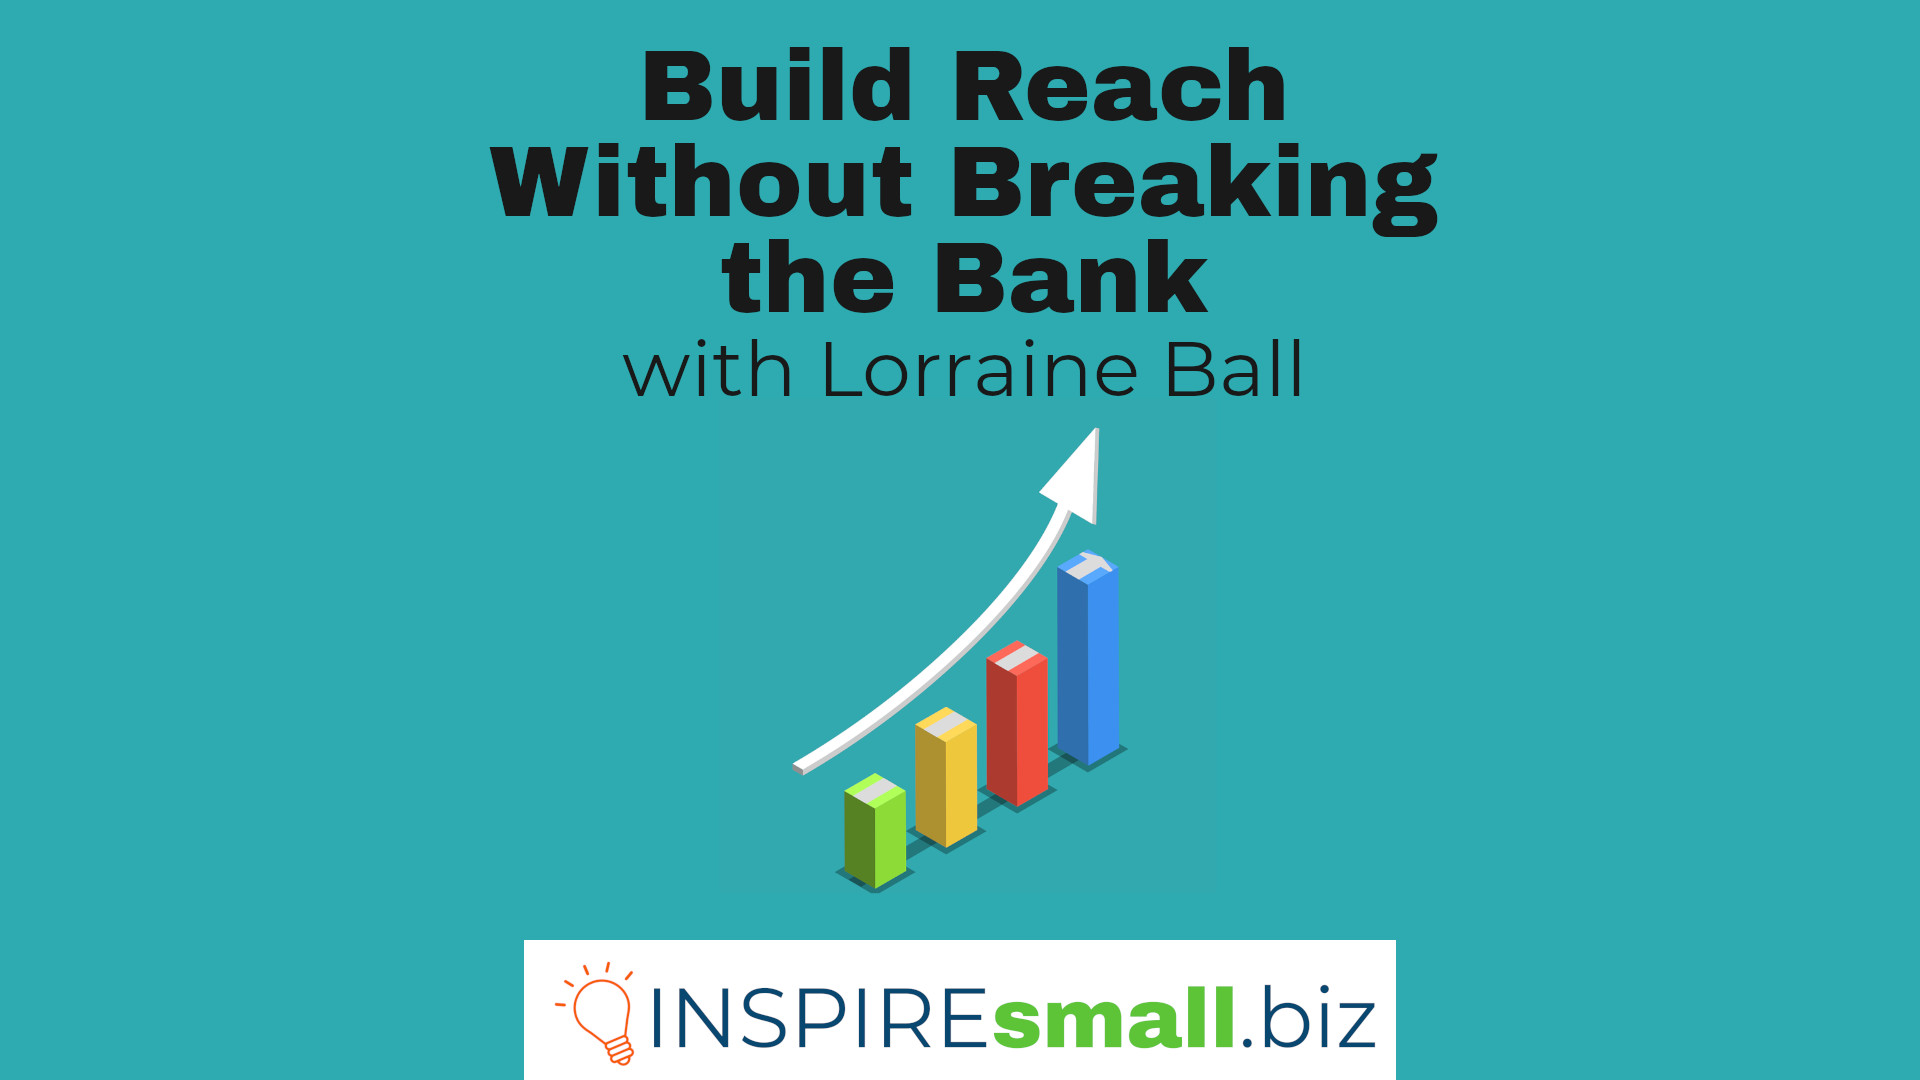 Build Reach Without Breaking the Bank with Lorraine Ball, hosted by INSPIREsmall.biz